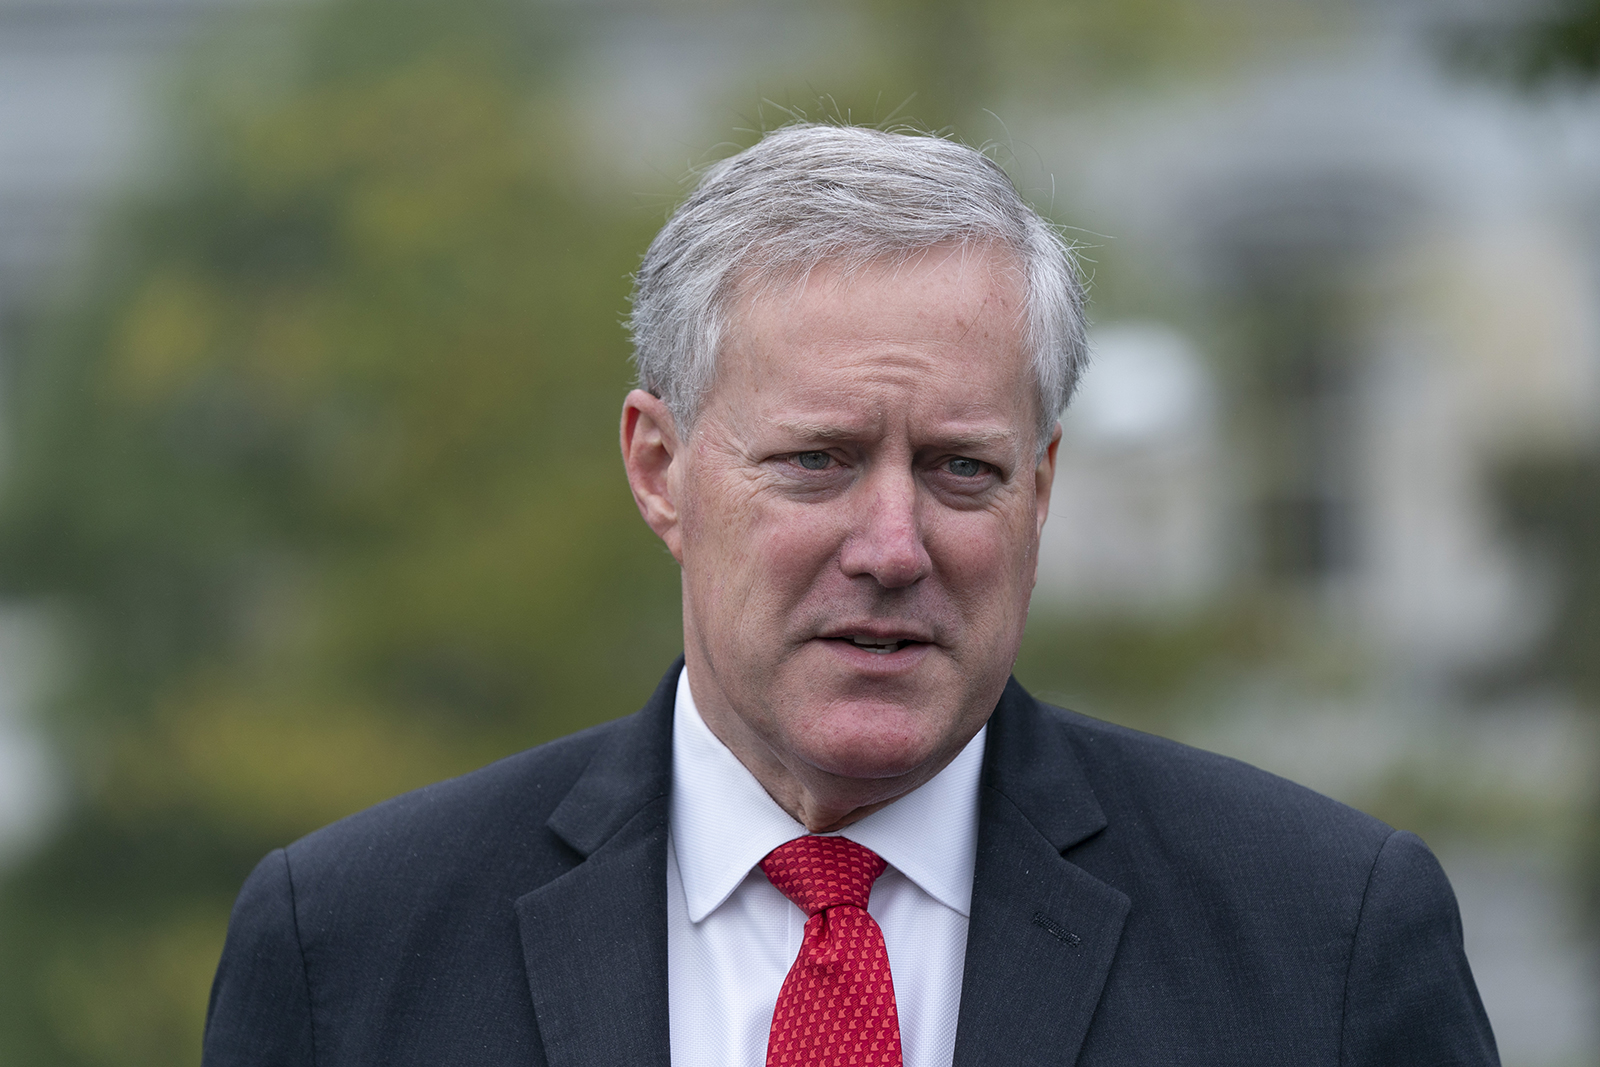 Mark Meadows, former White House chief of staff, speaks to members of the media outside of the White House in Washington, D.C., U.S., on Wednesday, Oct. 21, 2020. (Chris Kleponis/Polaris/Bloomberg/Getty Images)